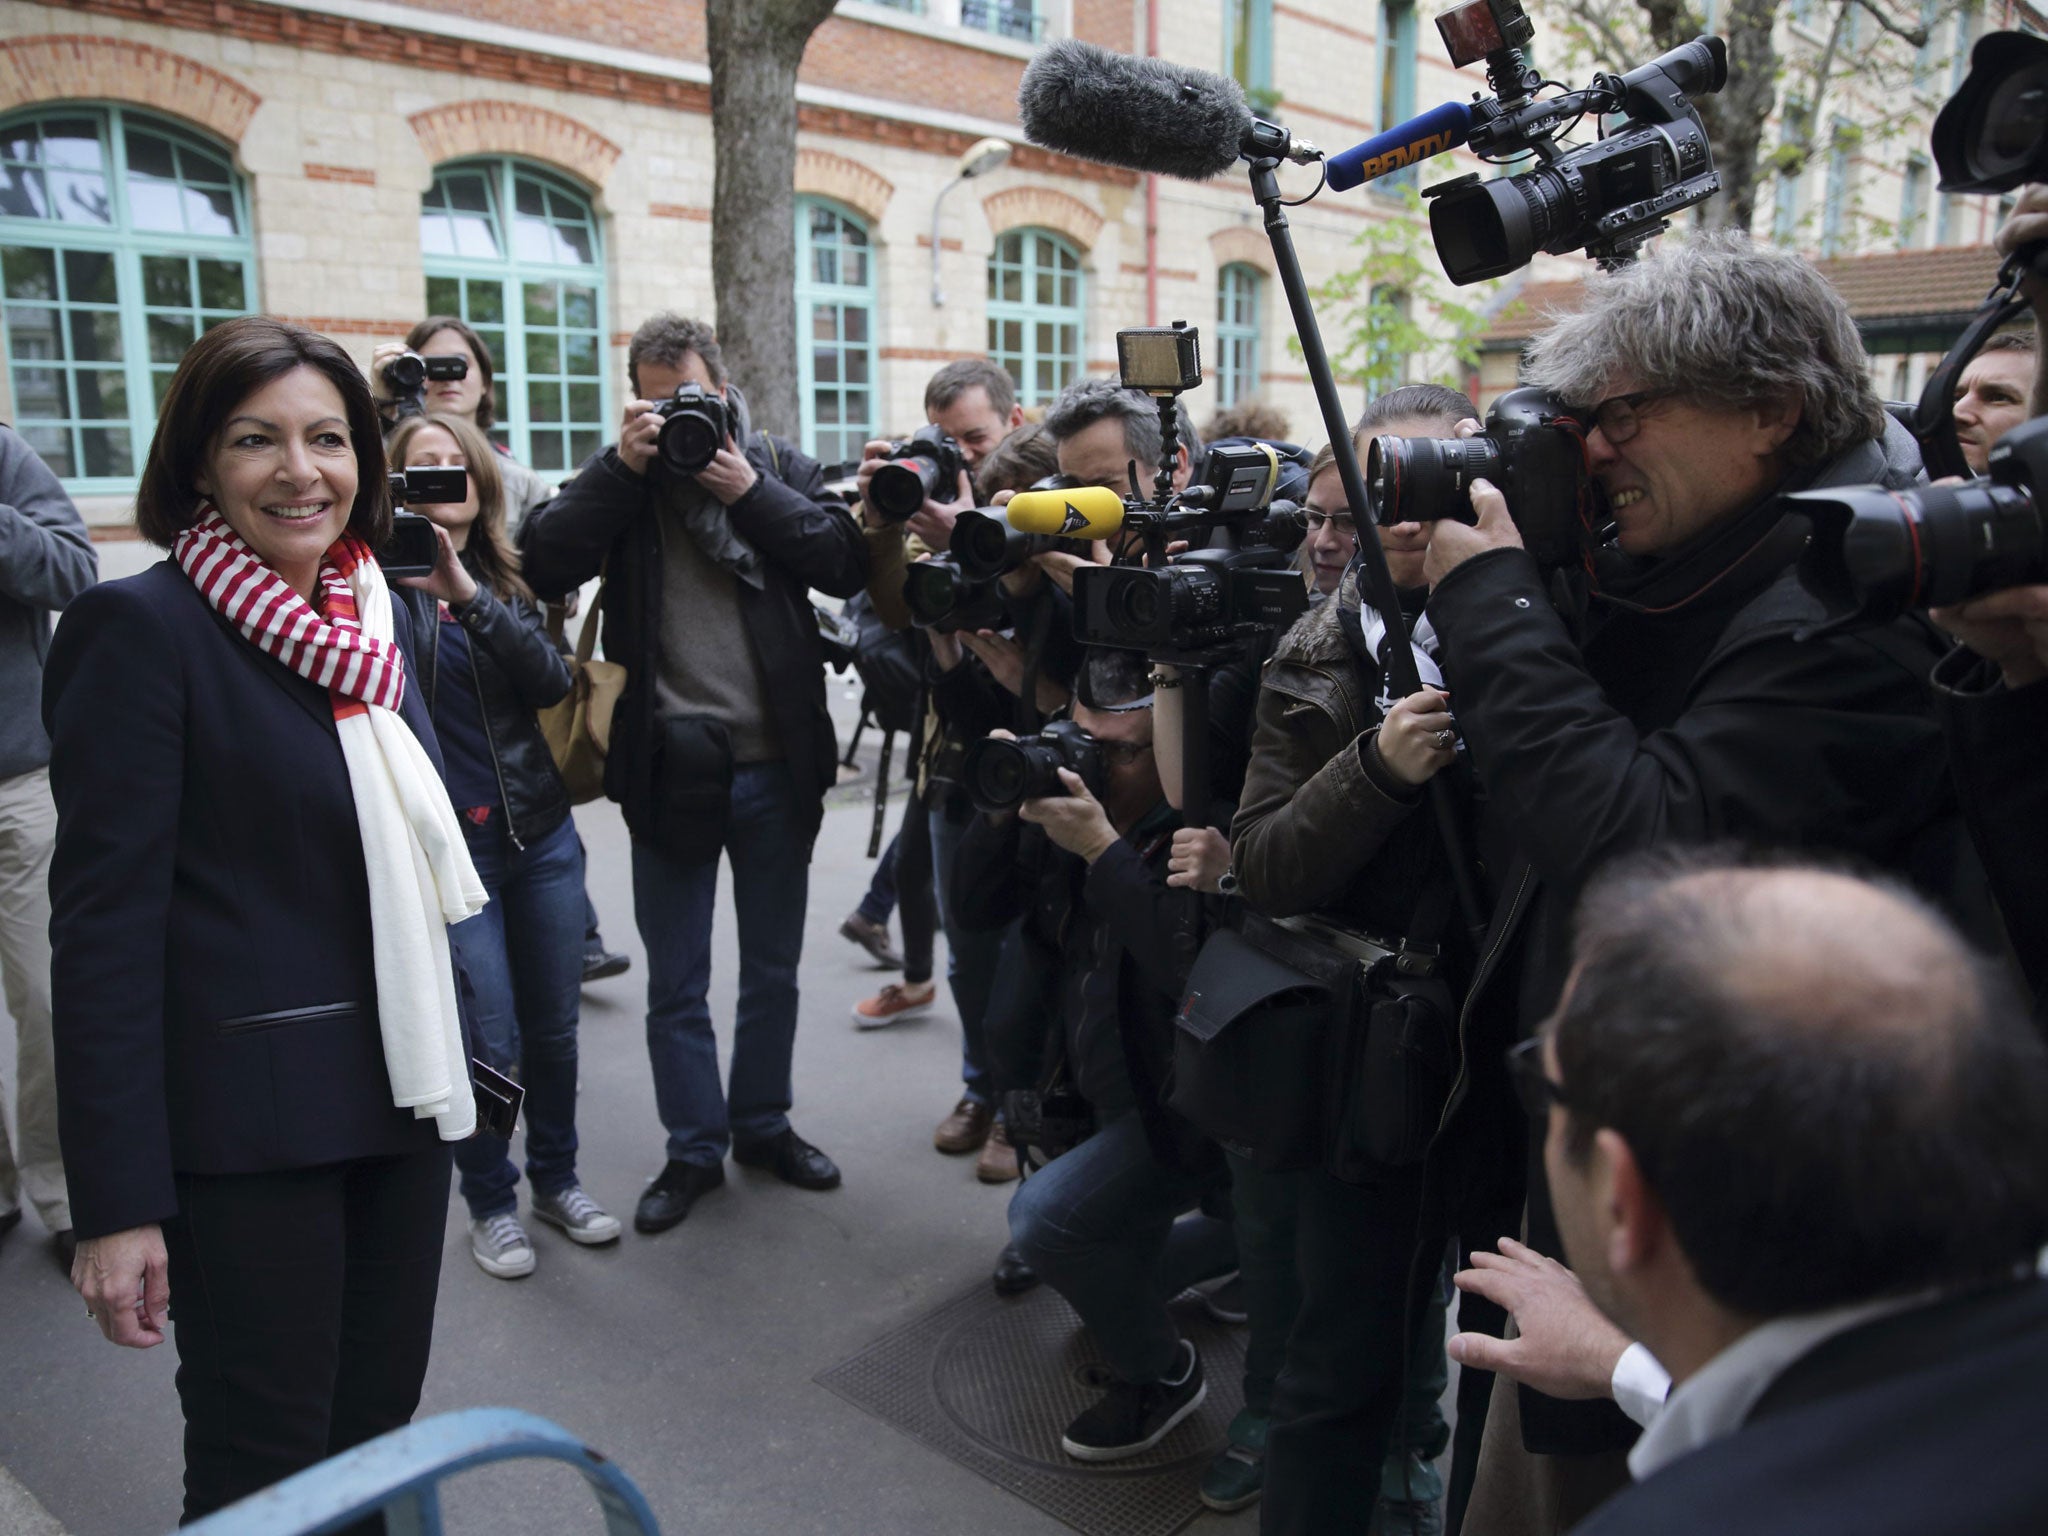 Anne Hidalgo, the Socialist candidate, is the new Paris Mayor